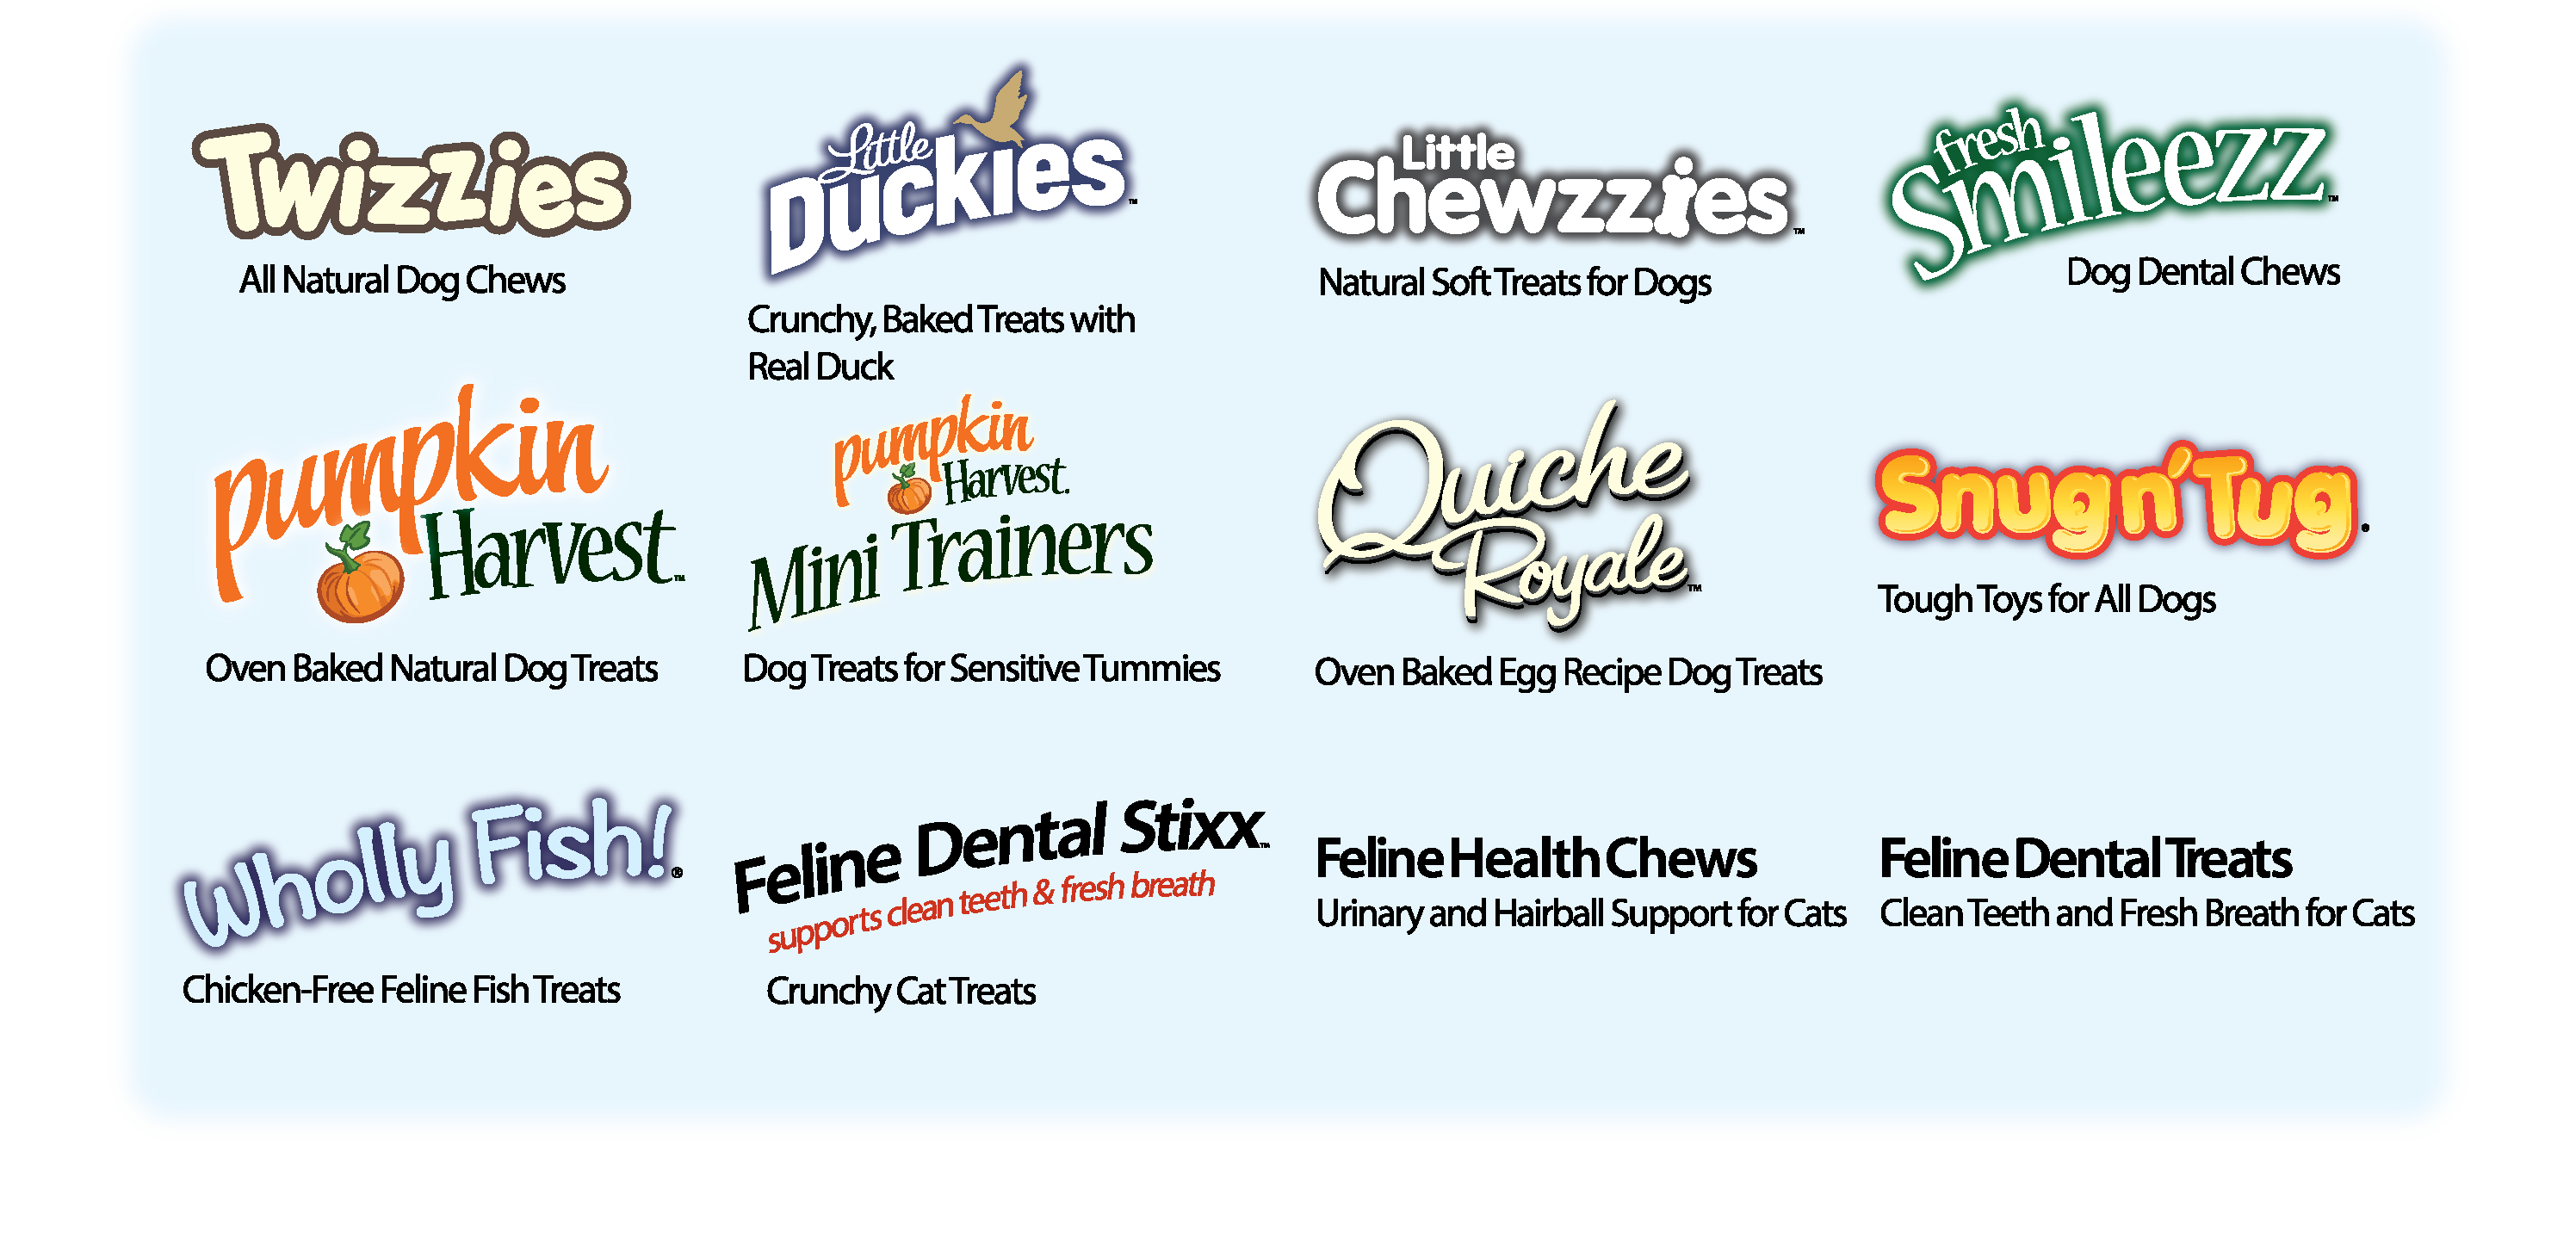 The full compliment of Emerald Pet product logos.